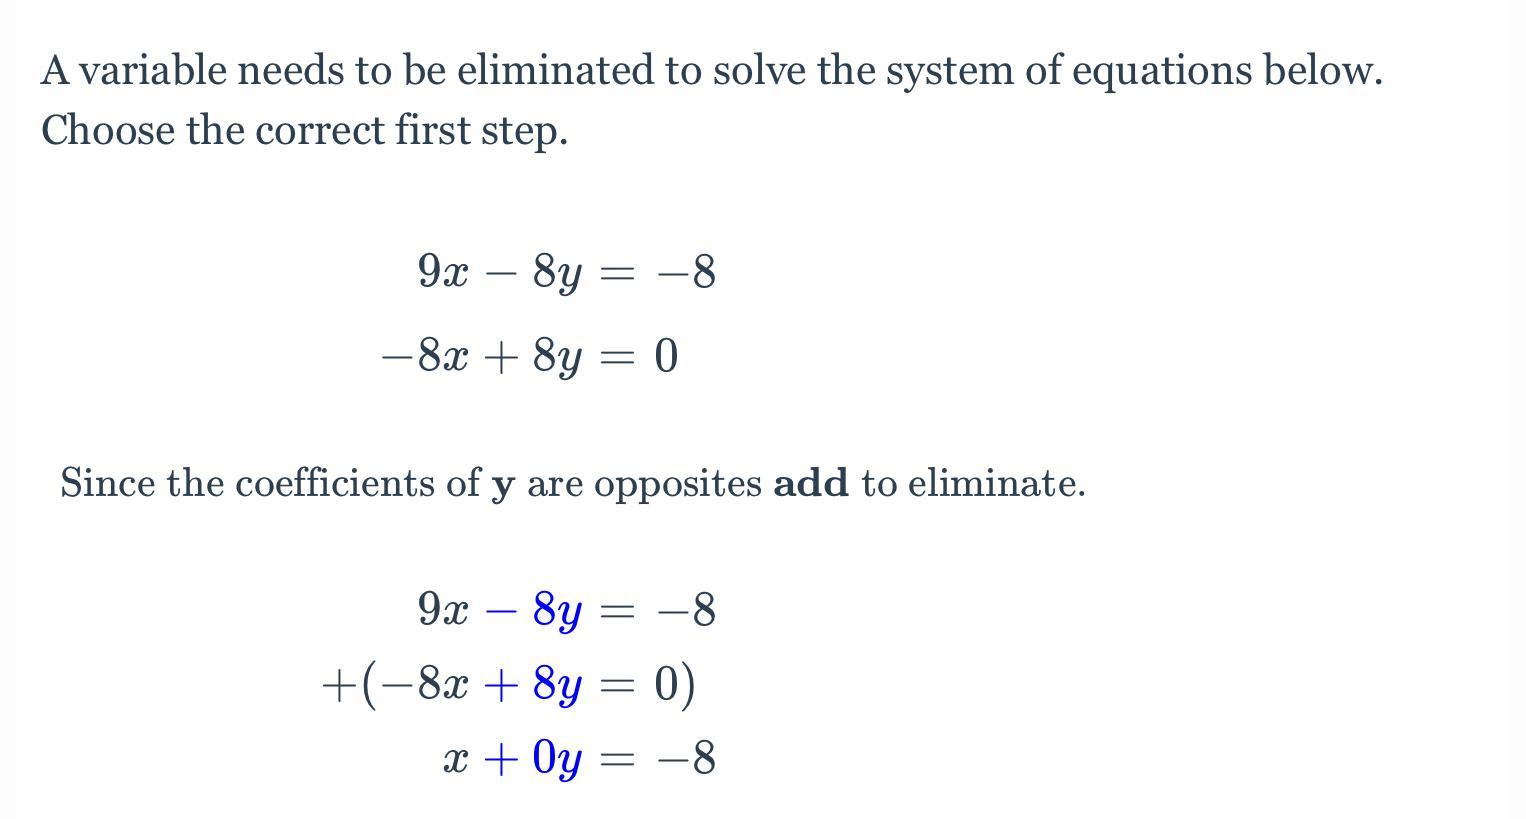 A Variable Needs To Be Eliminated To Solve The System Of Equations Below. Choose The Correct First Step.